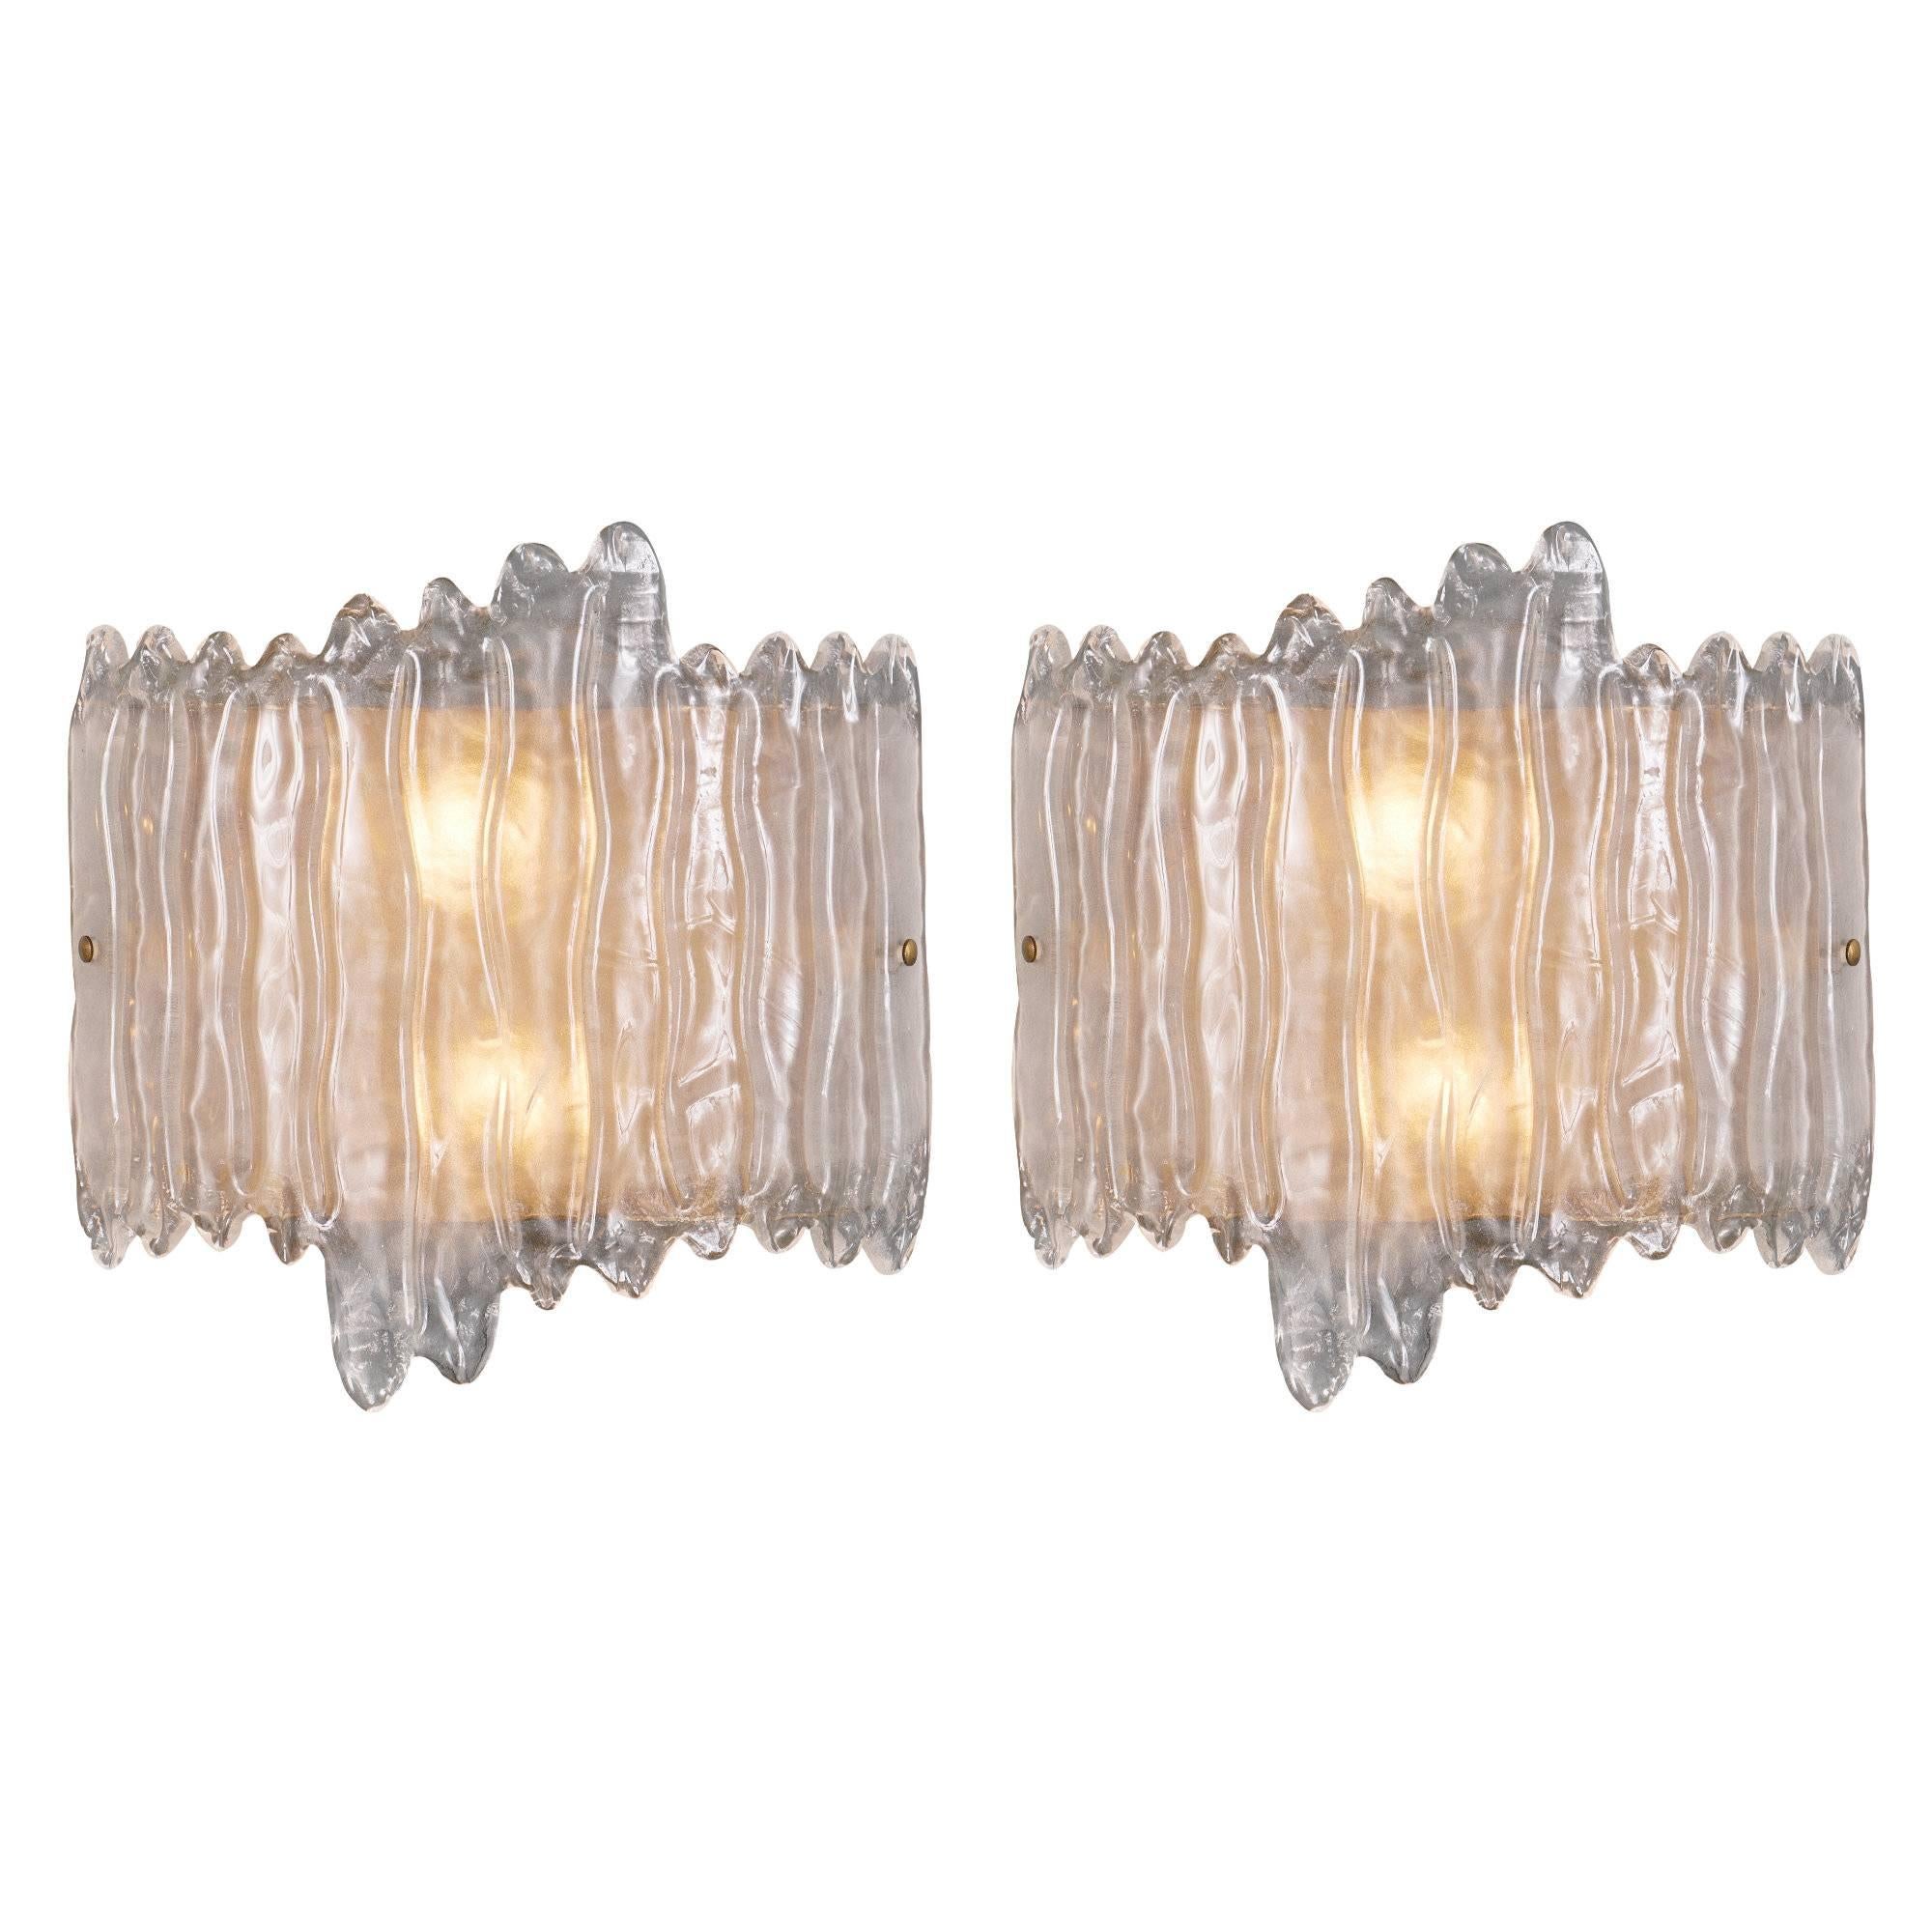 Organic Murano Glass Wall Sconces For Sale